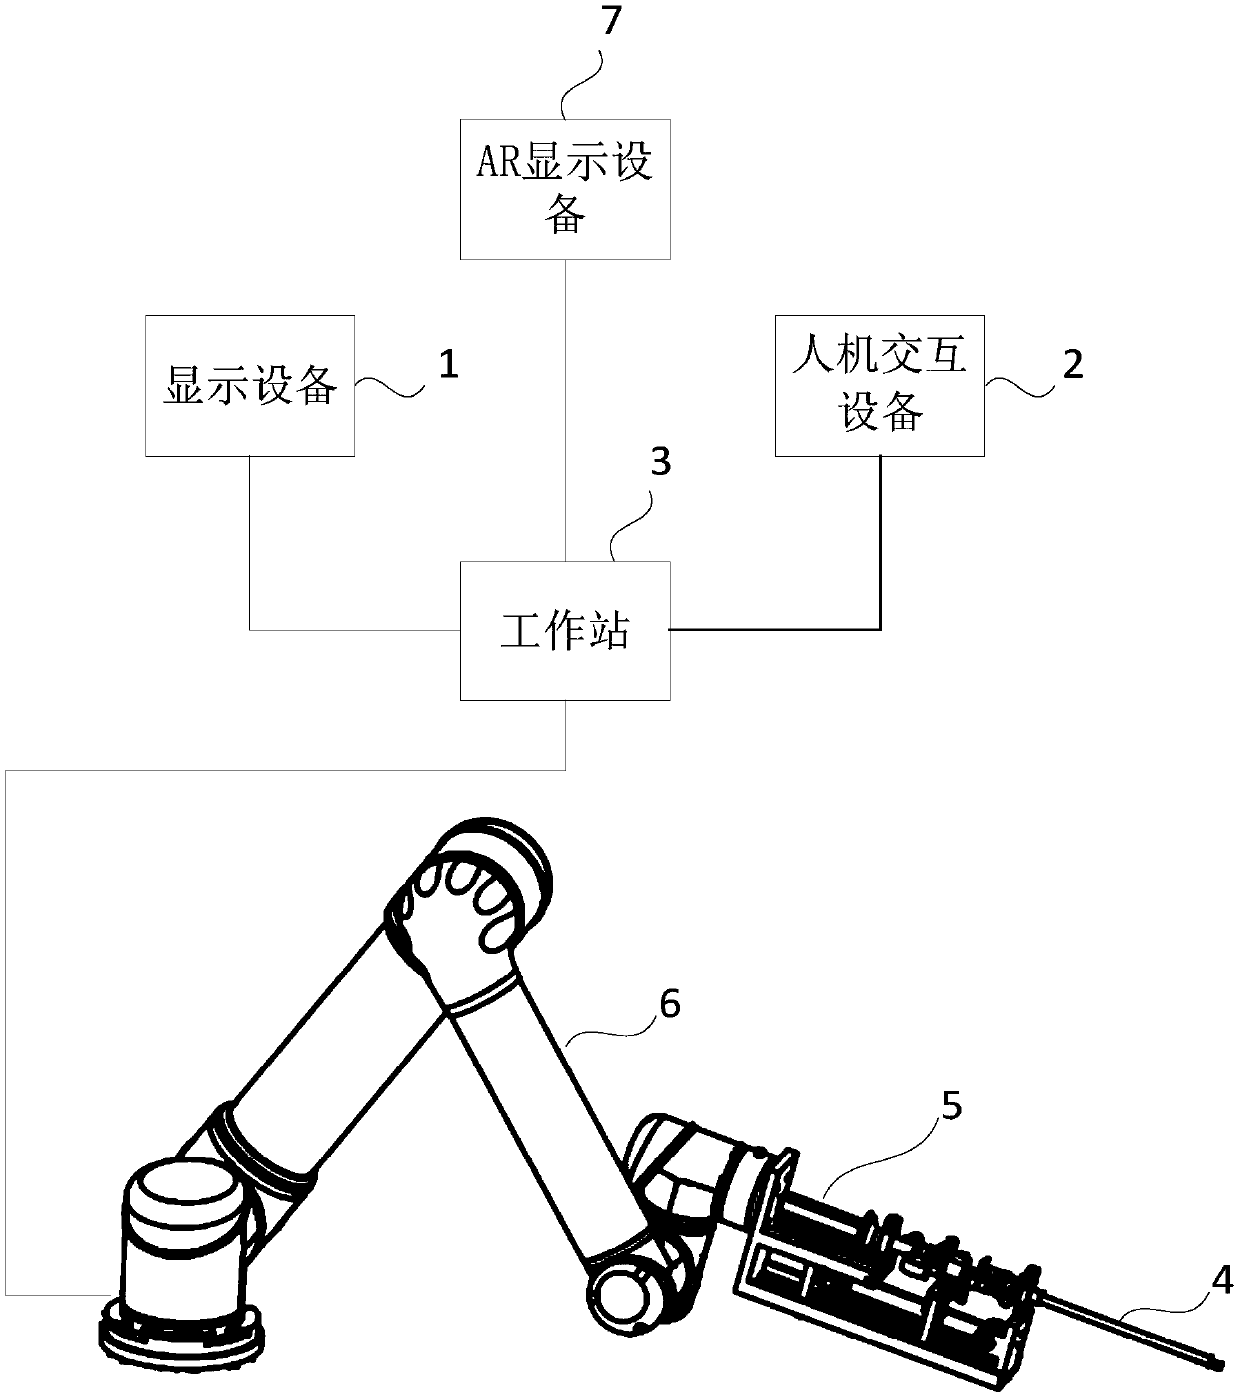 Transurethral resectoscope operation robot system